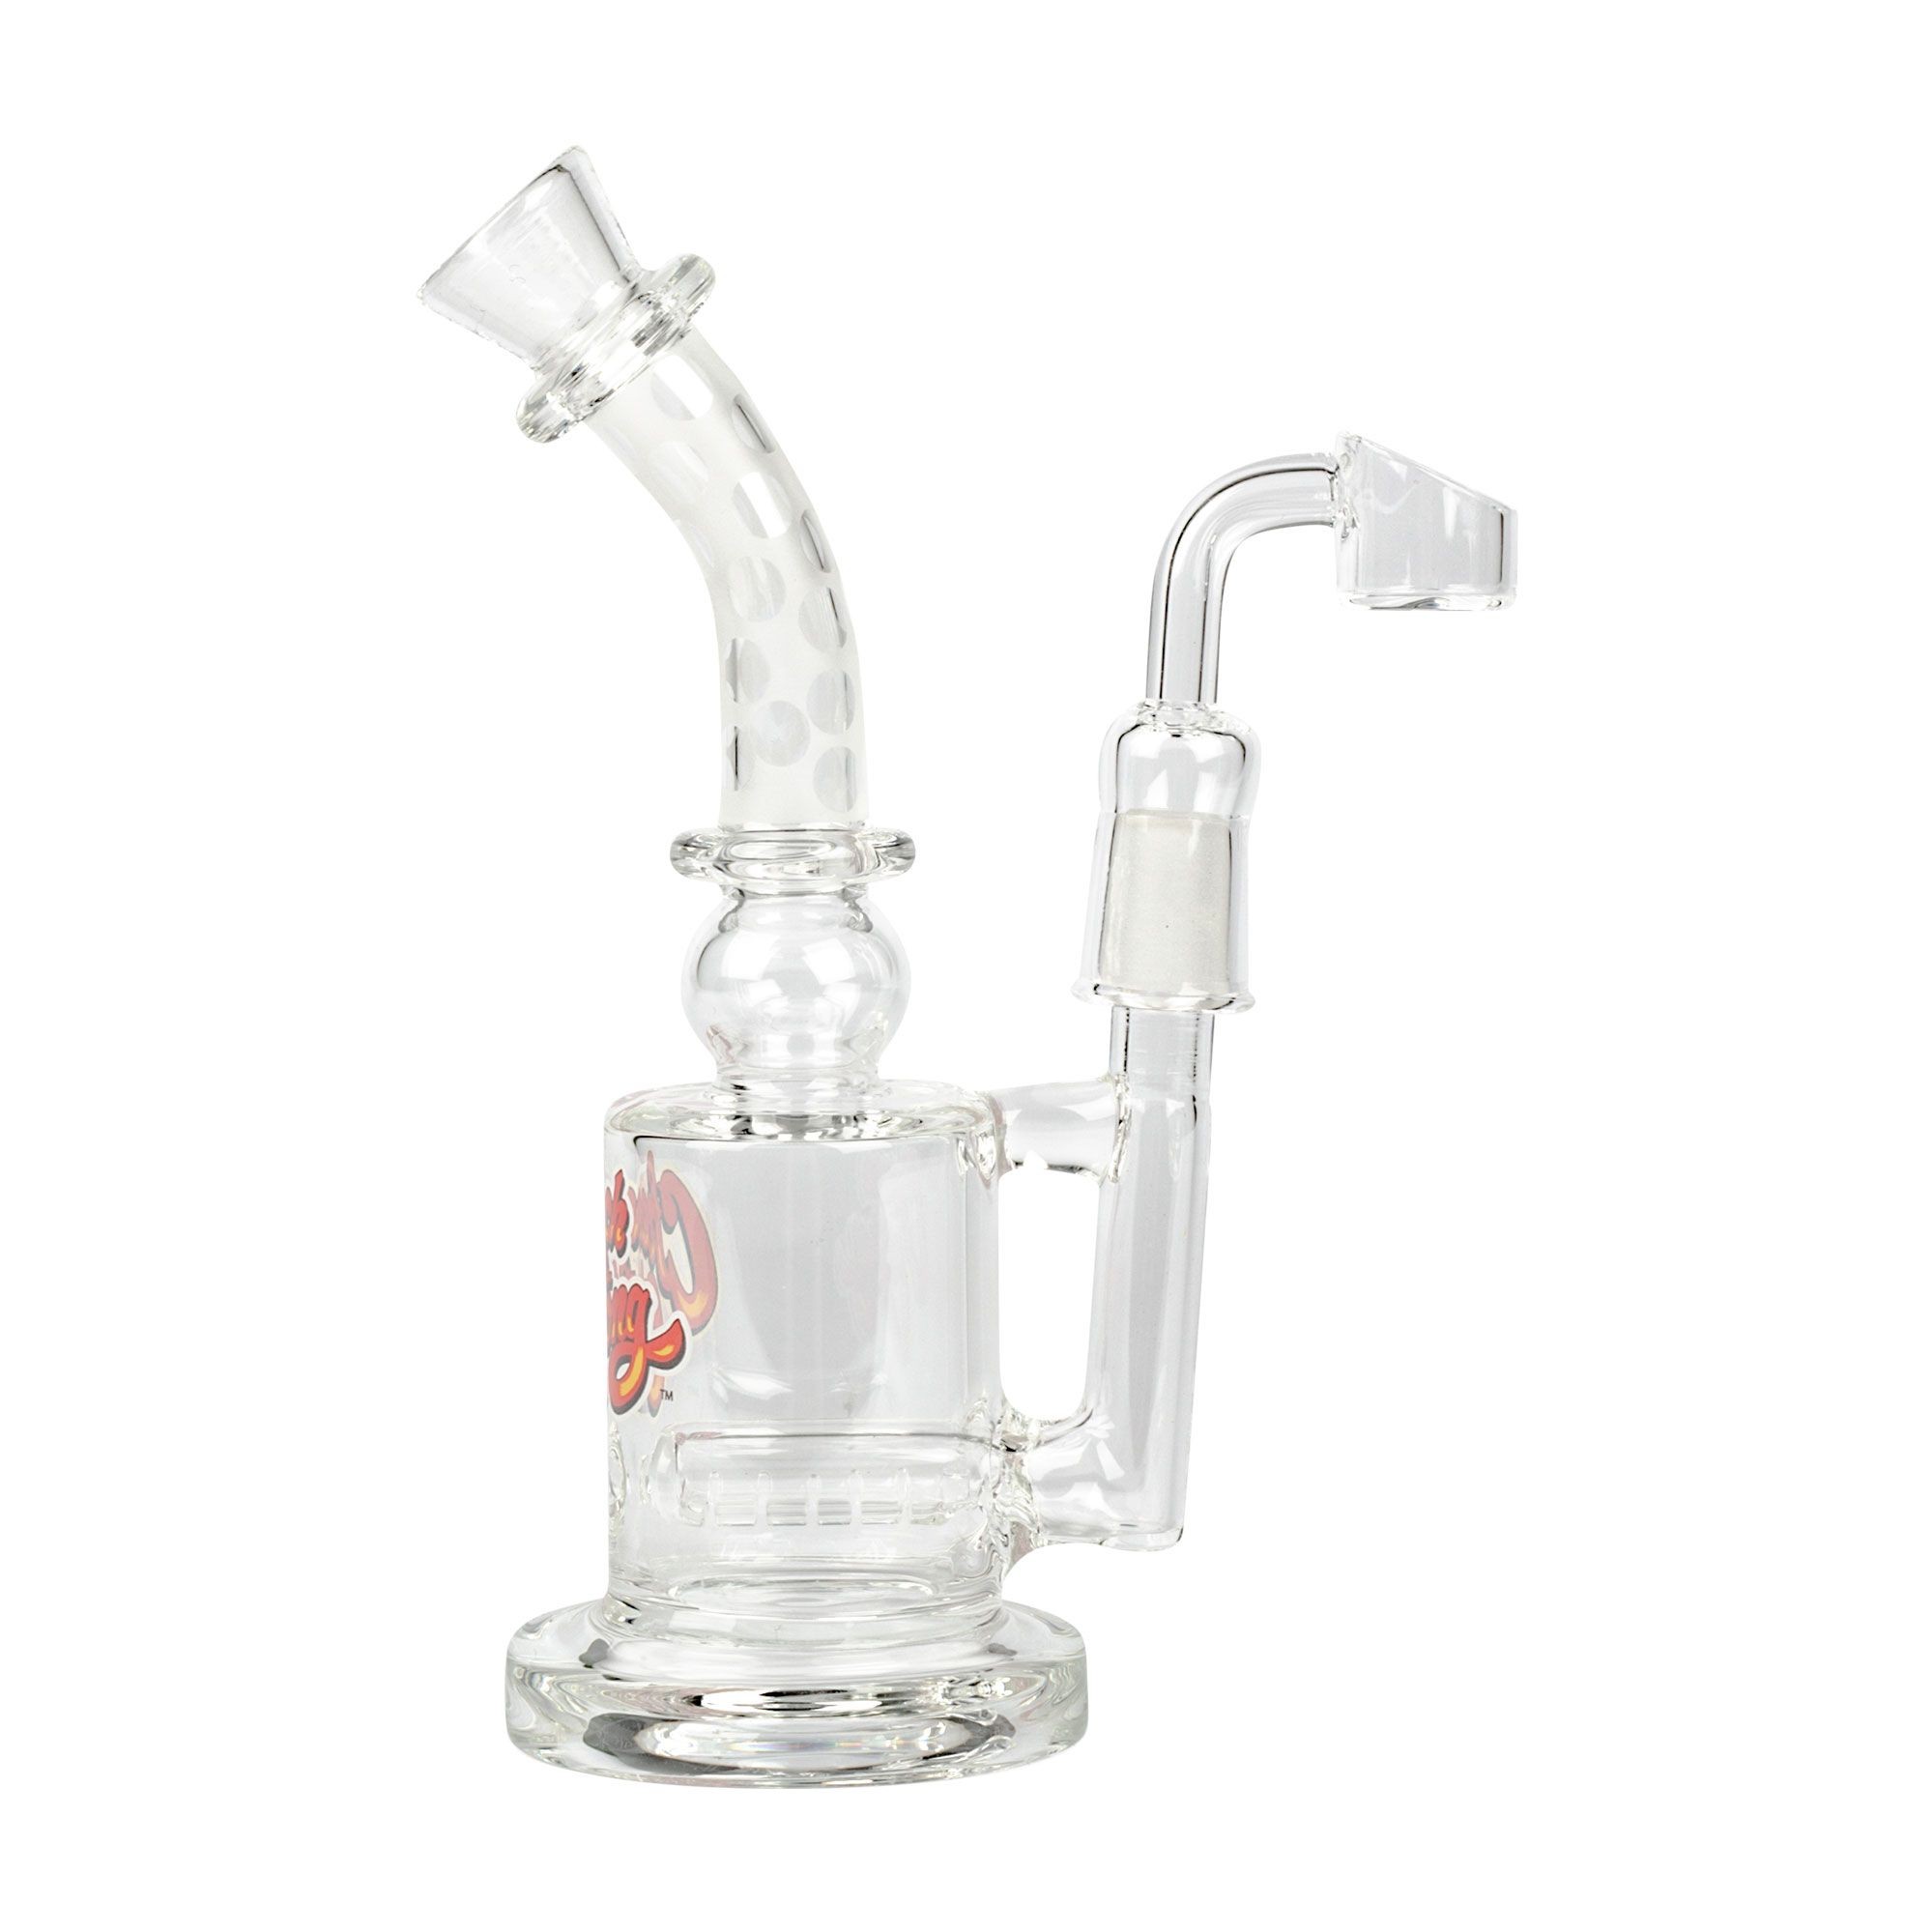 Cheech & Chong Glass: Mowie Wowie Concentrate Bubbler | Leafly